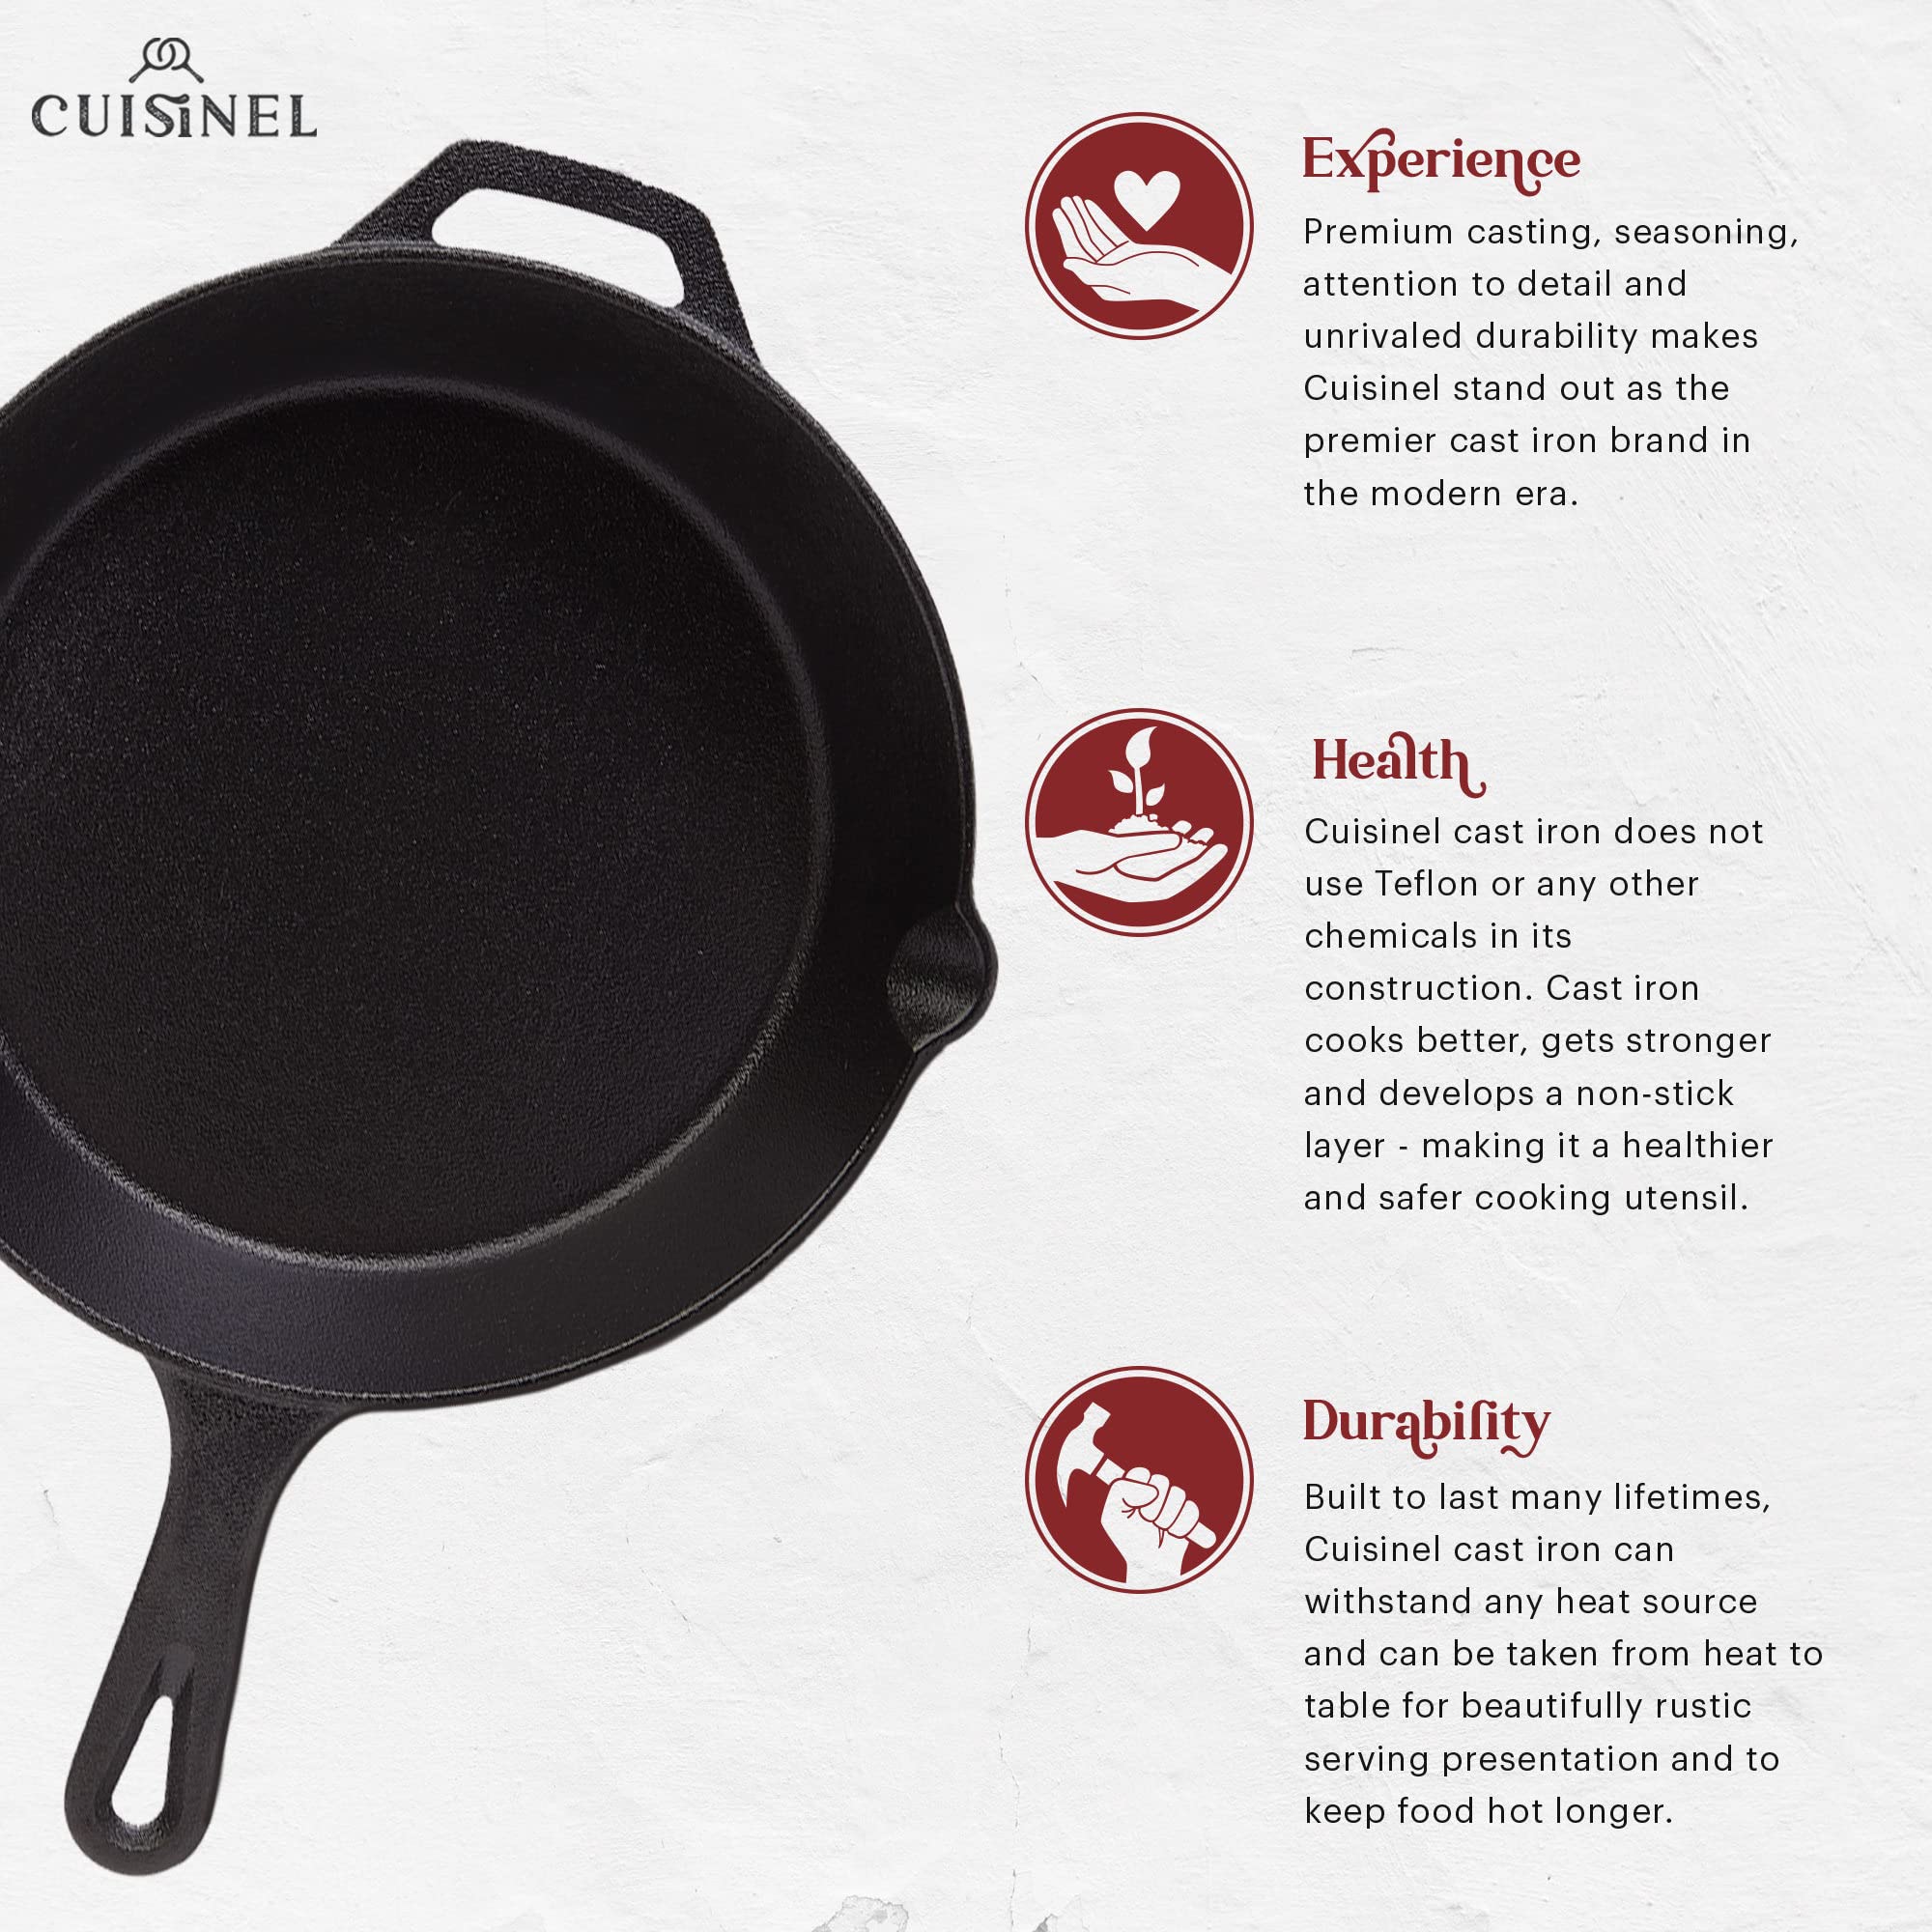 Cuisinel Cast Iron Grill Pan + Glass Lid - Square 10.5"-Inch Pre-Seasoned Skillet + Handle Cover + Pan Scraper - Grille, Firepit, Stovetop, Induction Safe - Great for Grilling, Frying, Sautéing  - Good